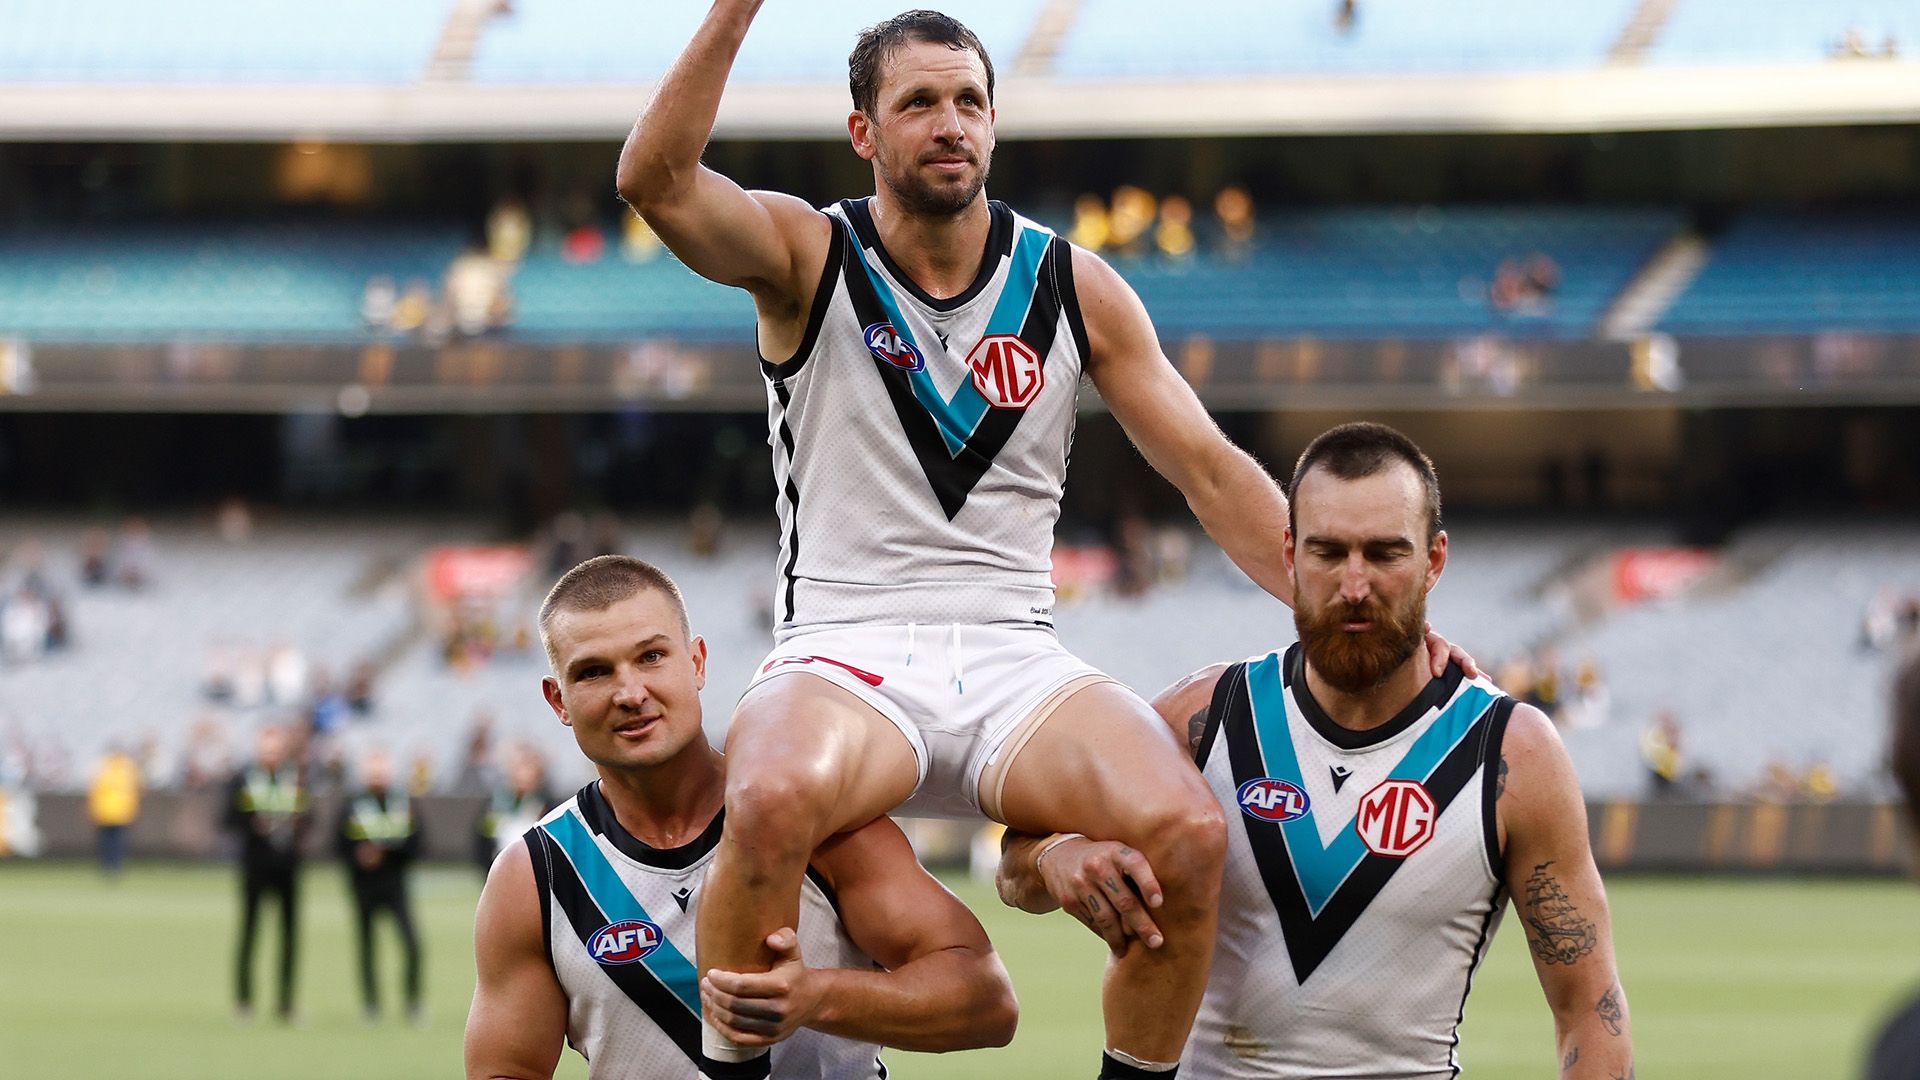 How to watch today's Port Adelaide Power vs Fremantle Dockers AFL match: Livestream, TV channel, and start time